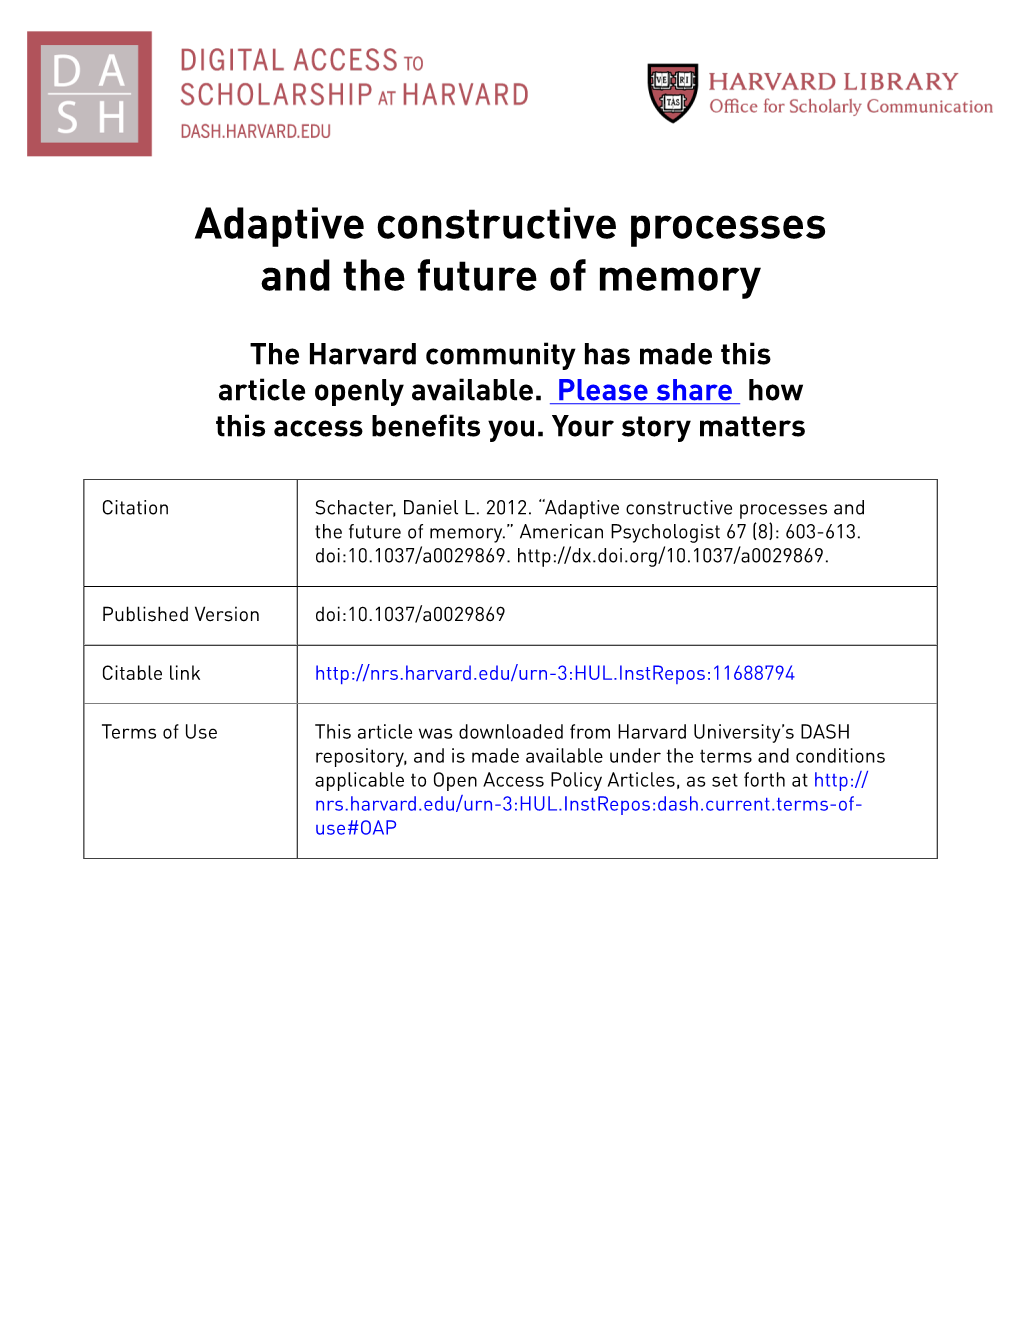 Adaptive Constructive Processes and the Future of Memory